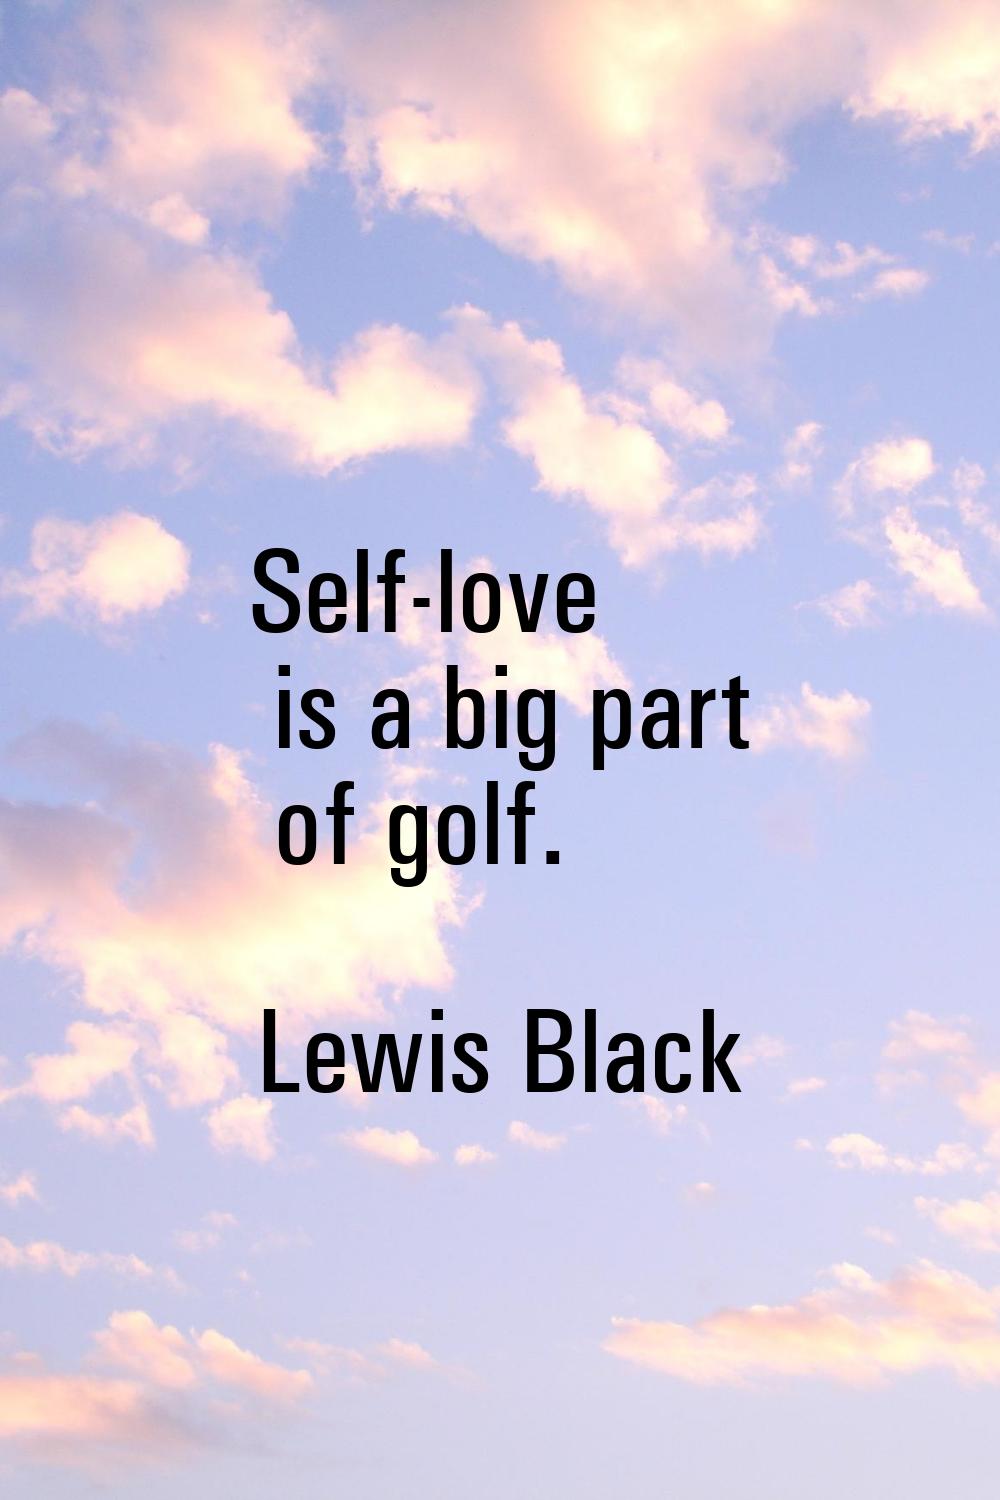 Self-love is a big part of golf.